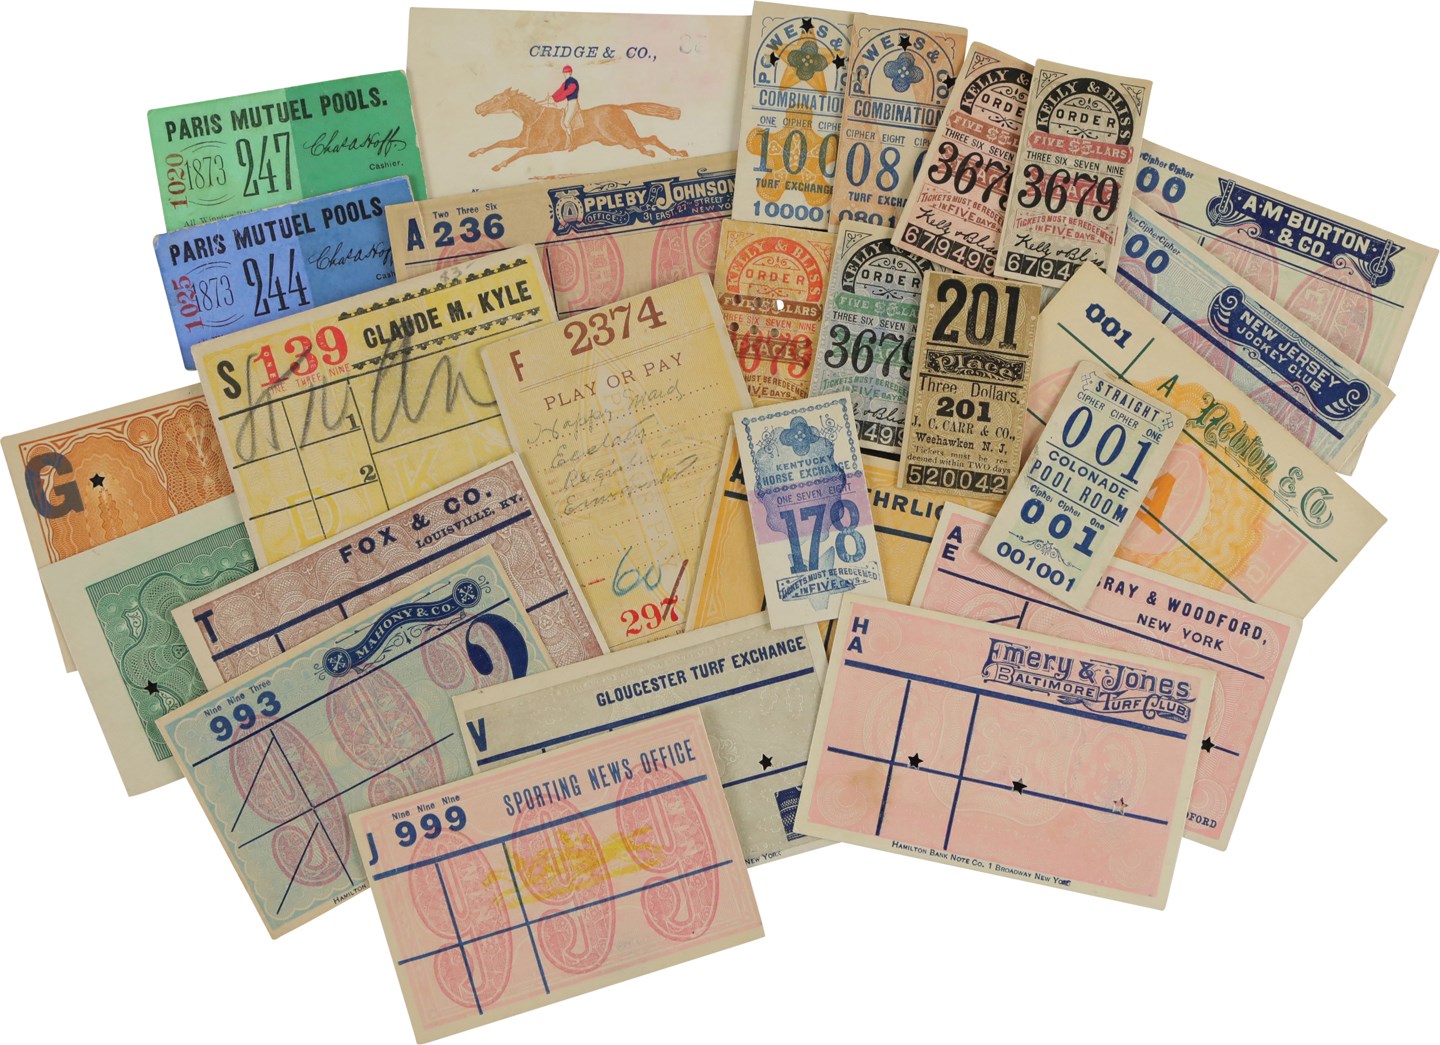 Original Paris Mutuel Pool & Poolroom Wagering Tickets from Over a Century Ago (27)